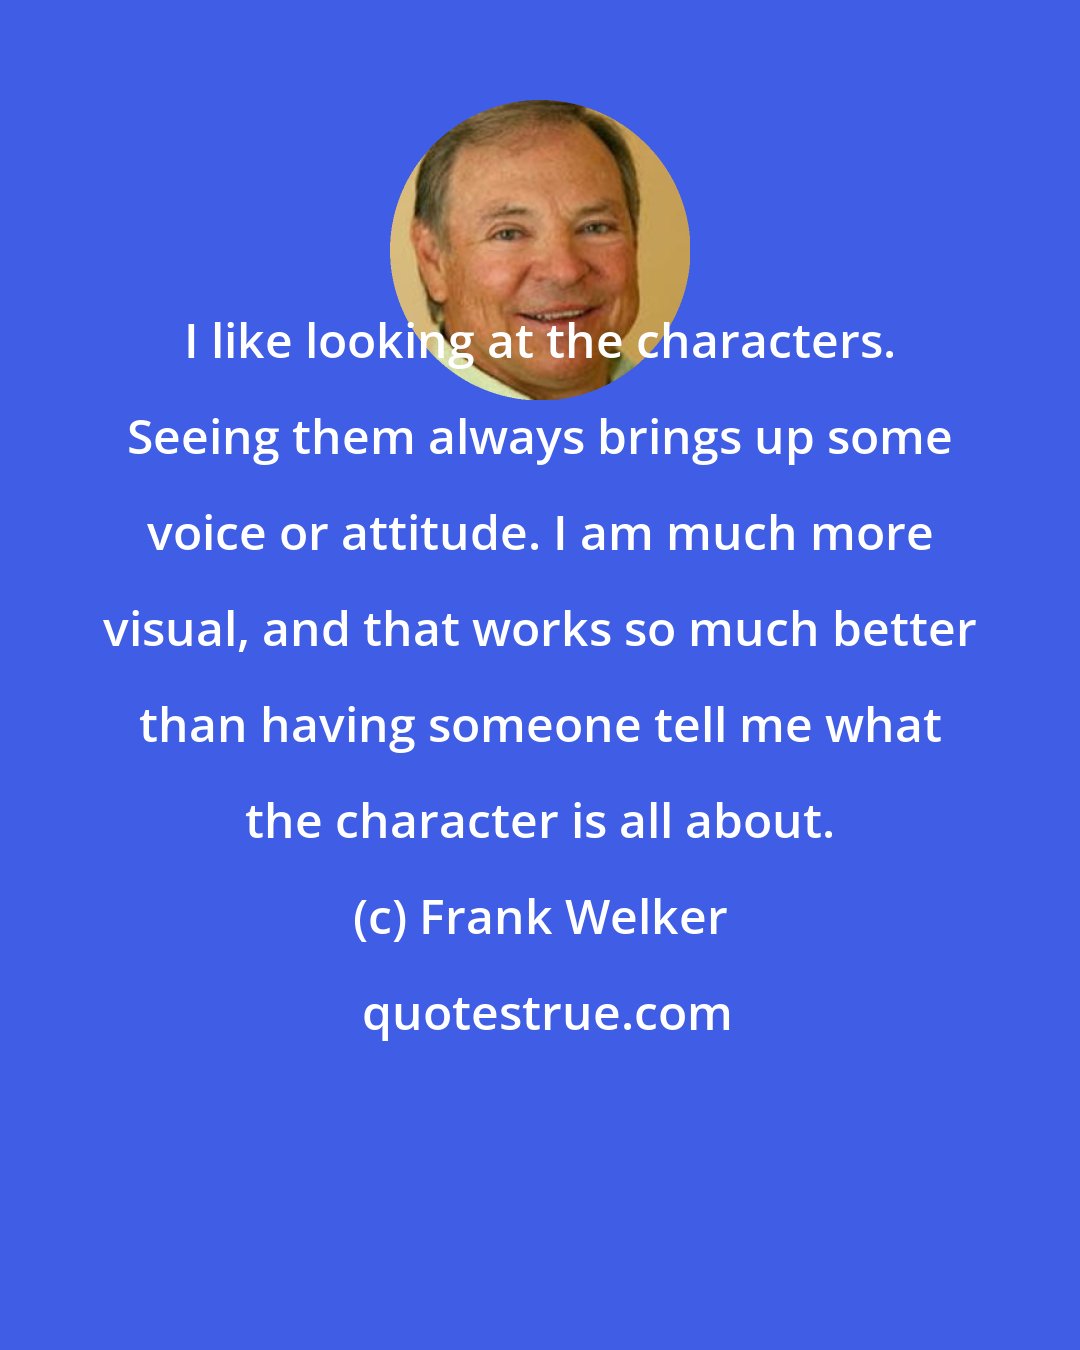 Frank Welker: I like looking at the characters. Seeing them always brings up some voice or attitude. I am much more visual, and that works so much better than having someone tell me what the character is all about.